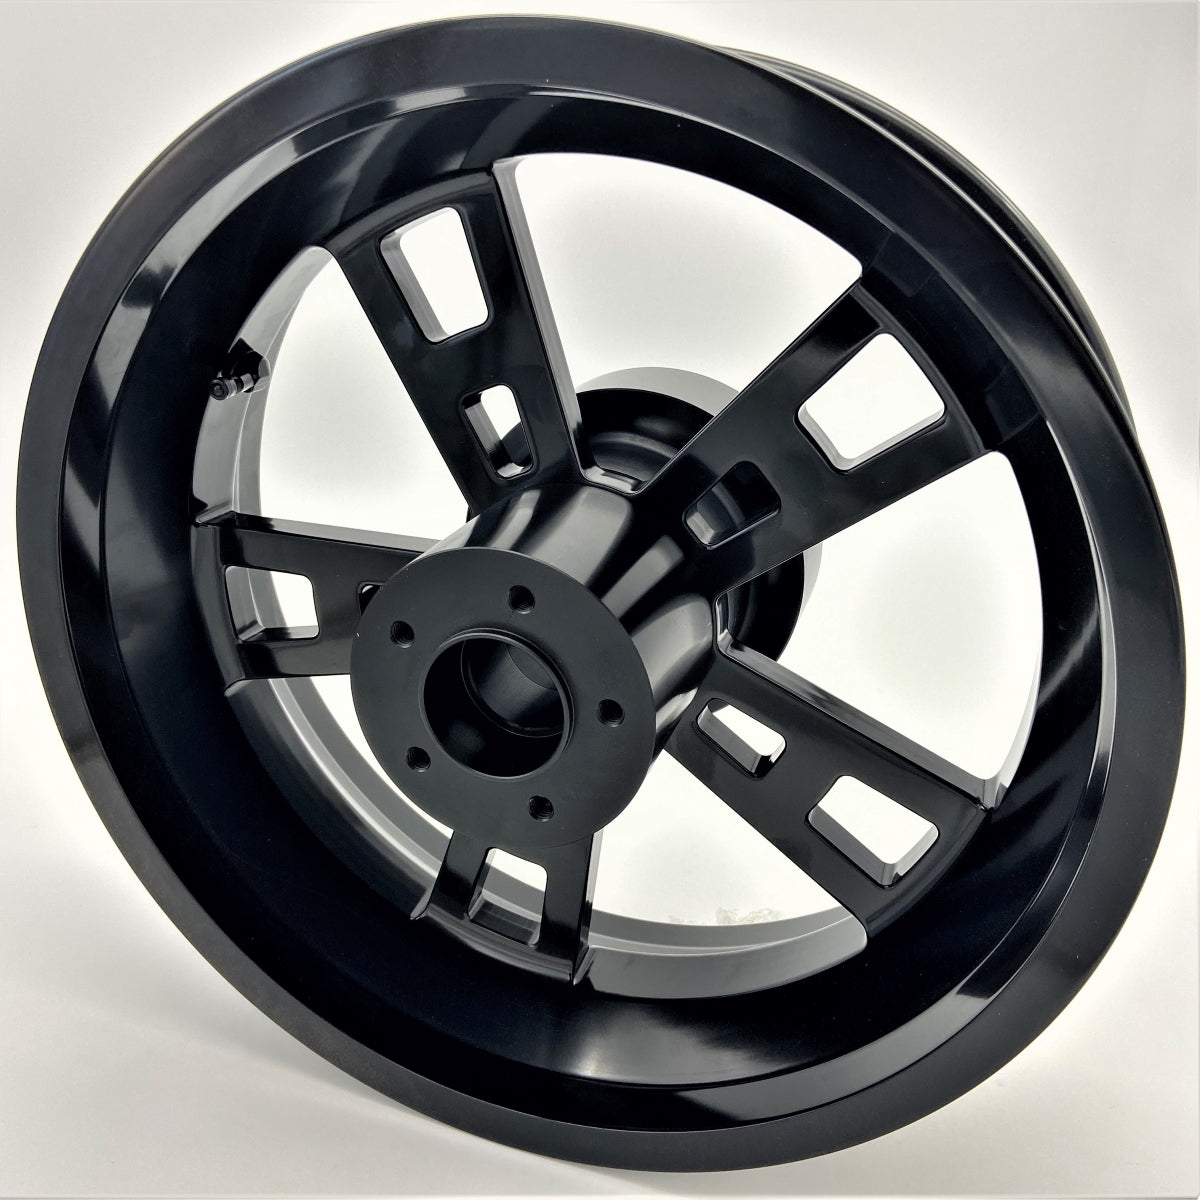 16-inch Forged Rear Wheel for Harley